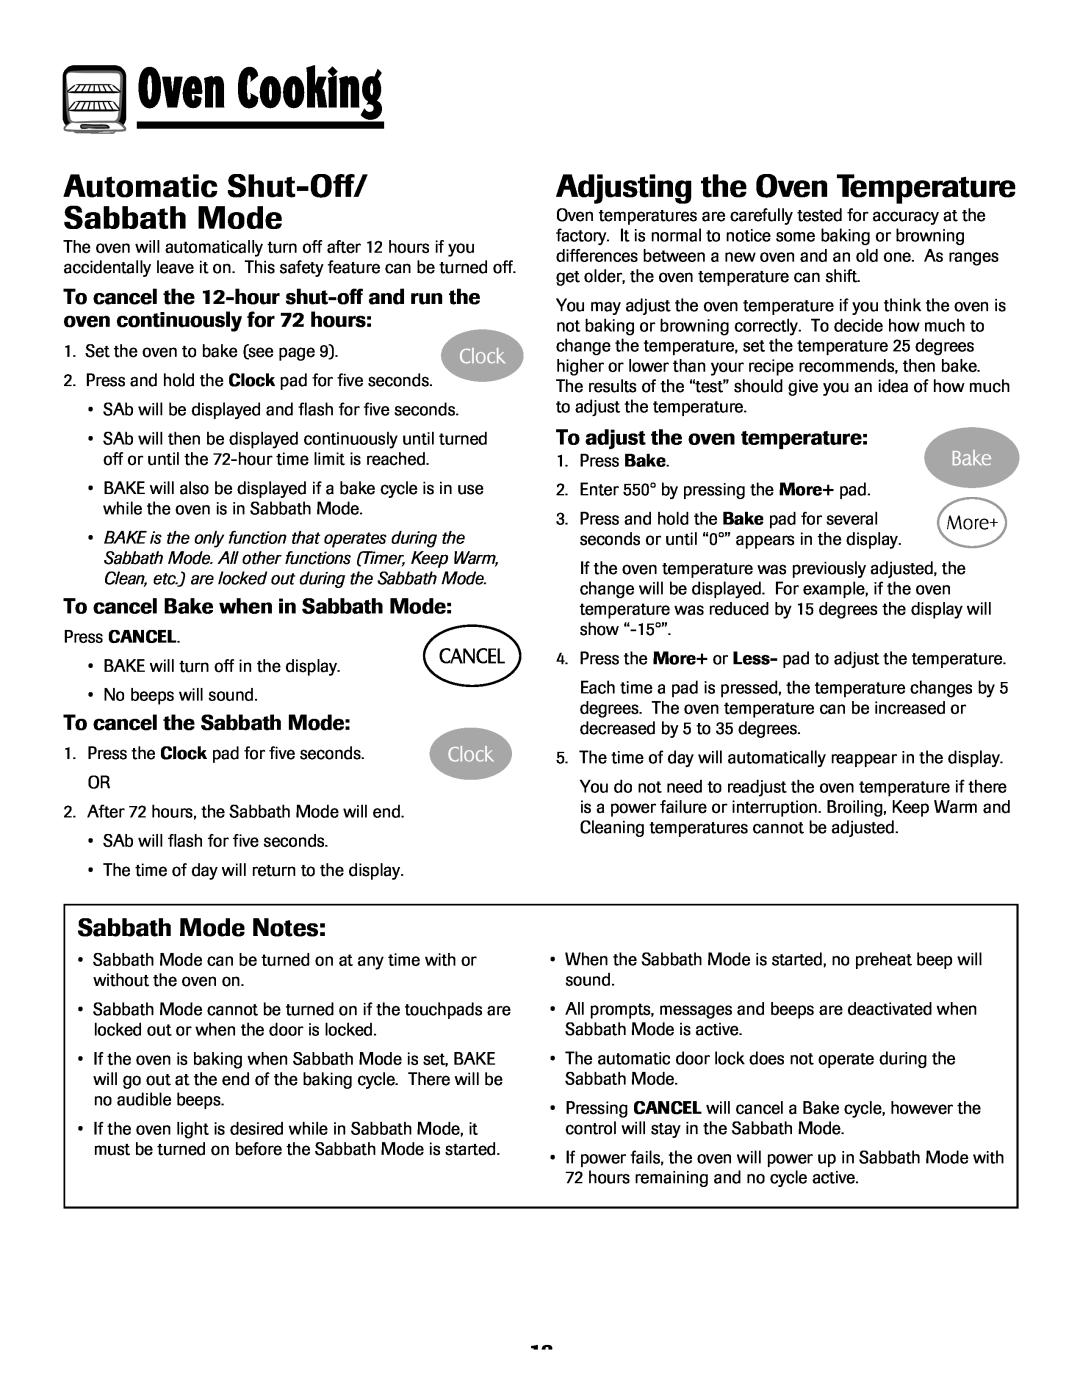 Maytag MES5752BAS manual Automatic Shut-Off Sabbath Mode, Adjusting the Oven Temperature, Sabbath Mode Notes, Oven Cooking 